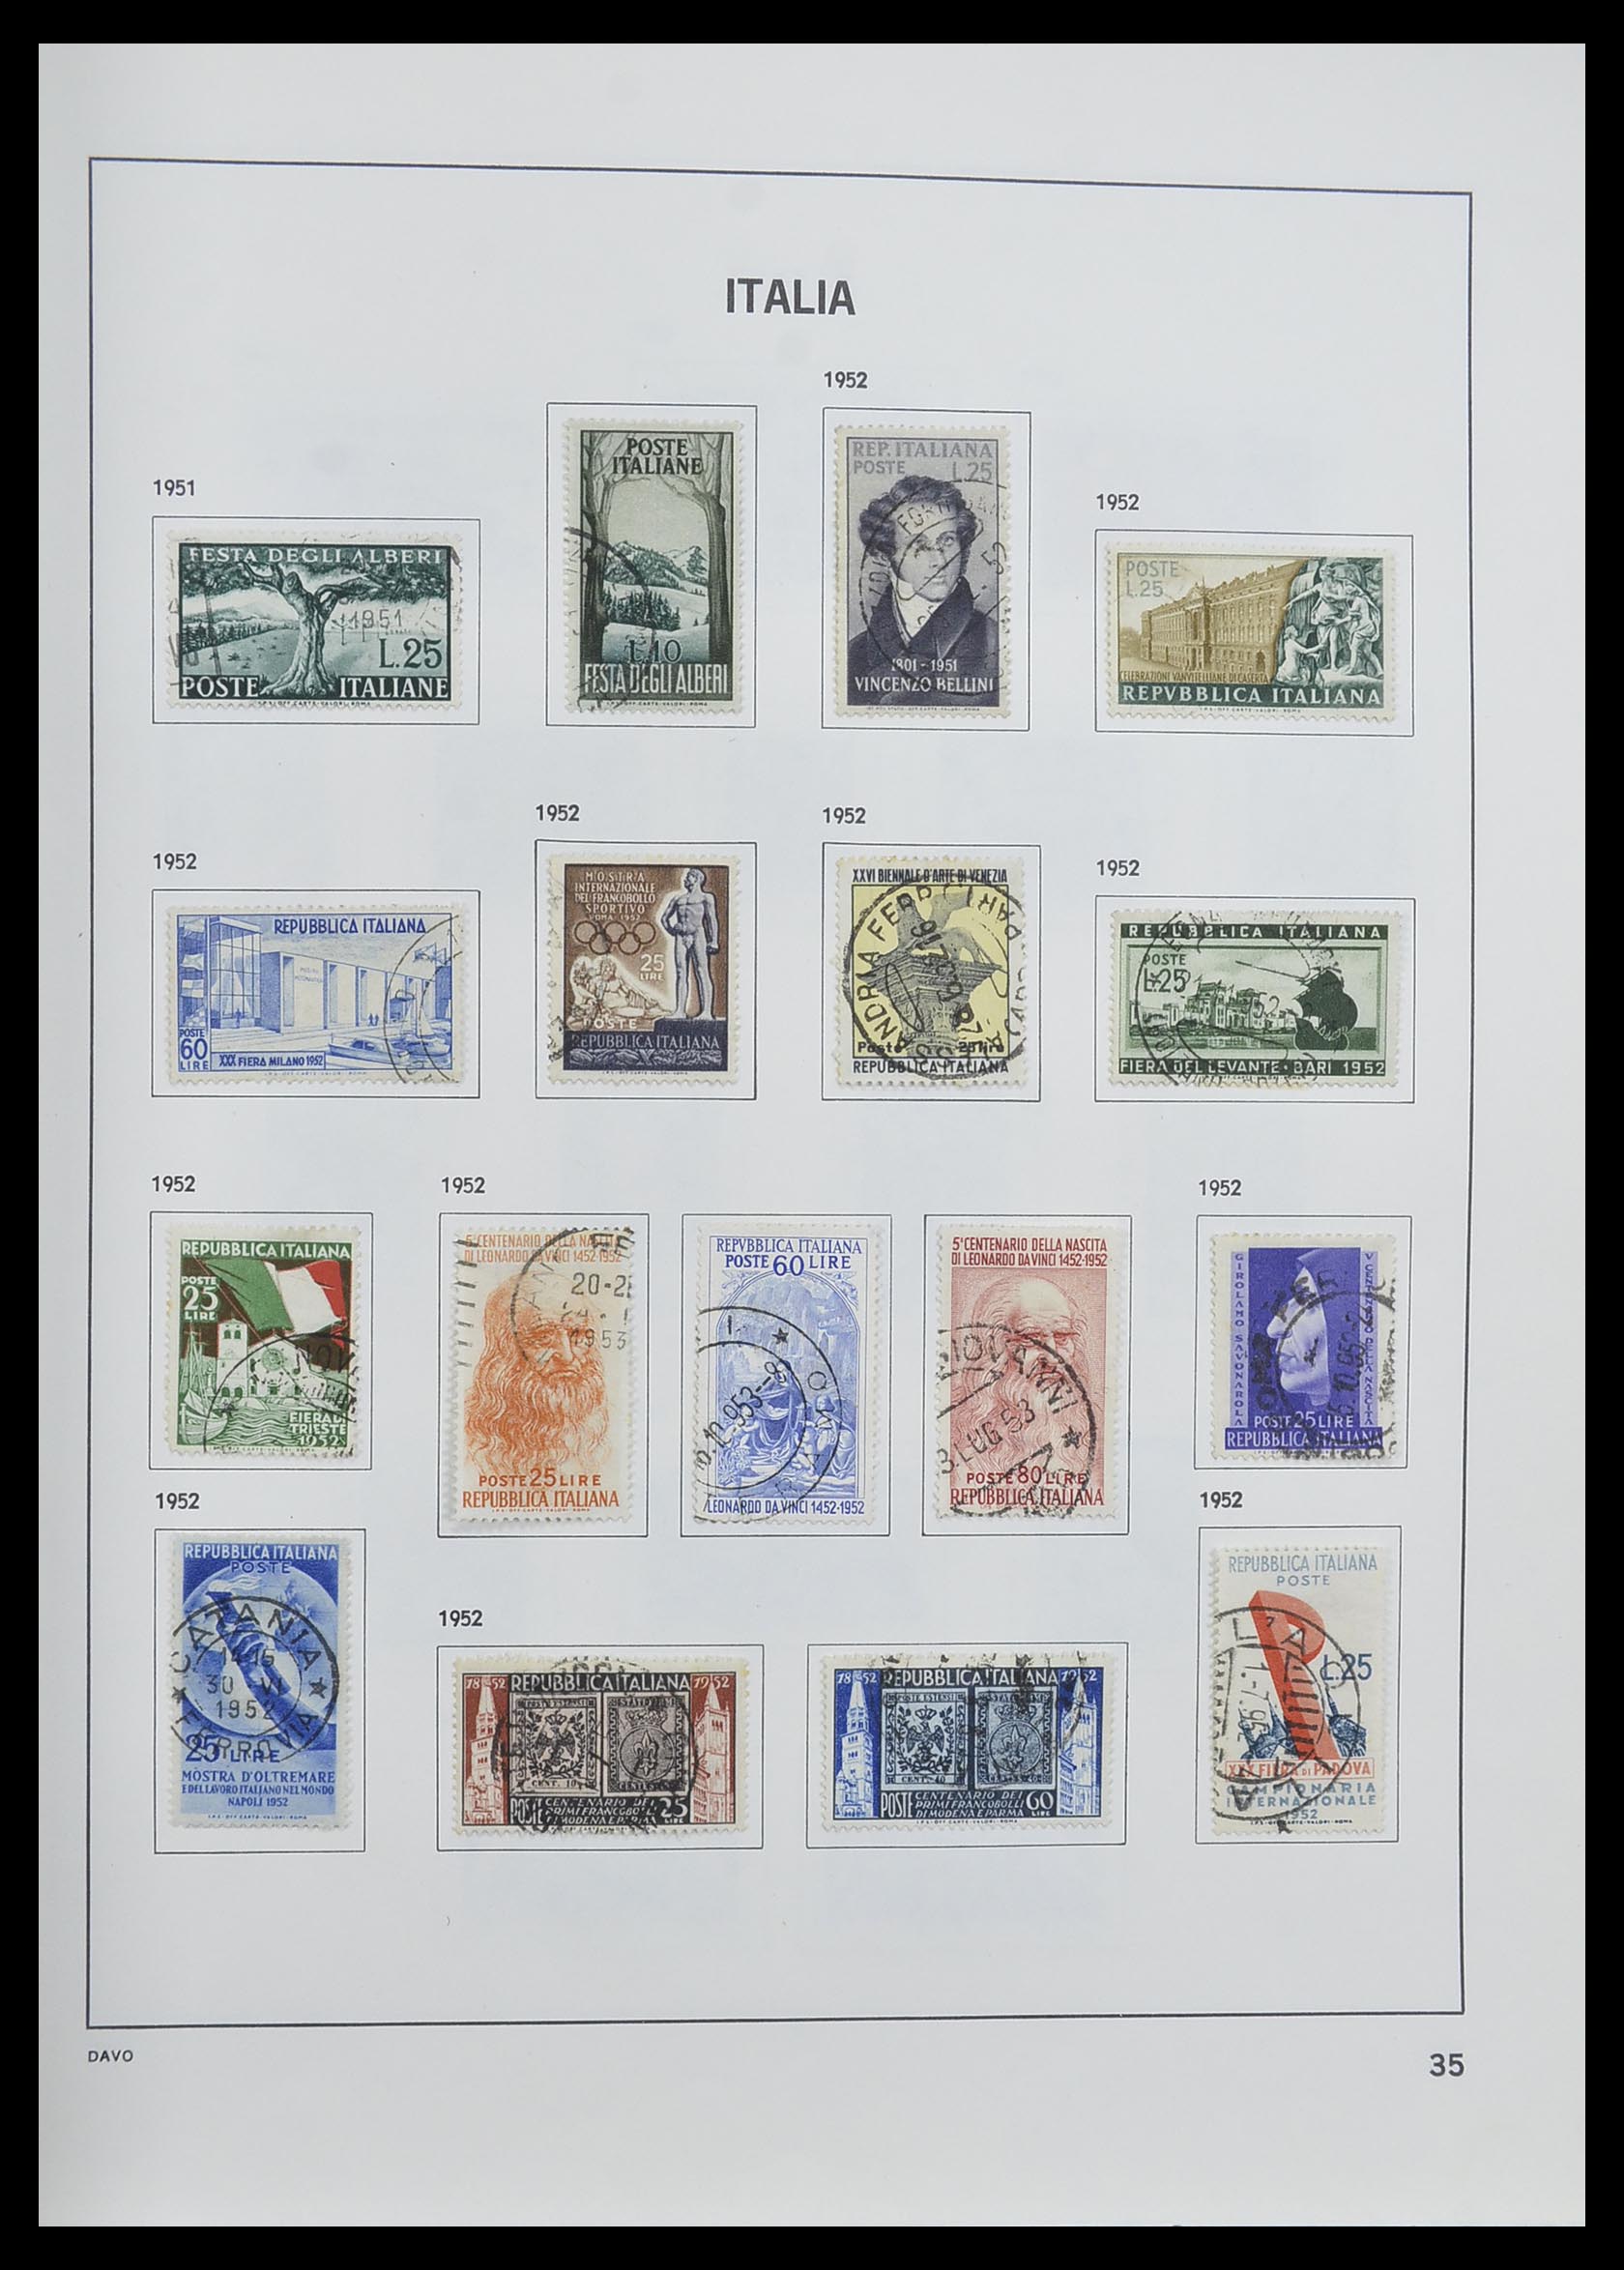 33580 038 - Stamp collection 33580 Italy supercollection 1861-1982.